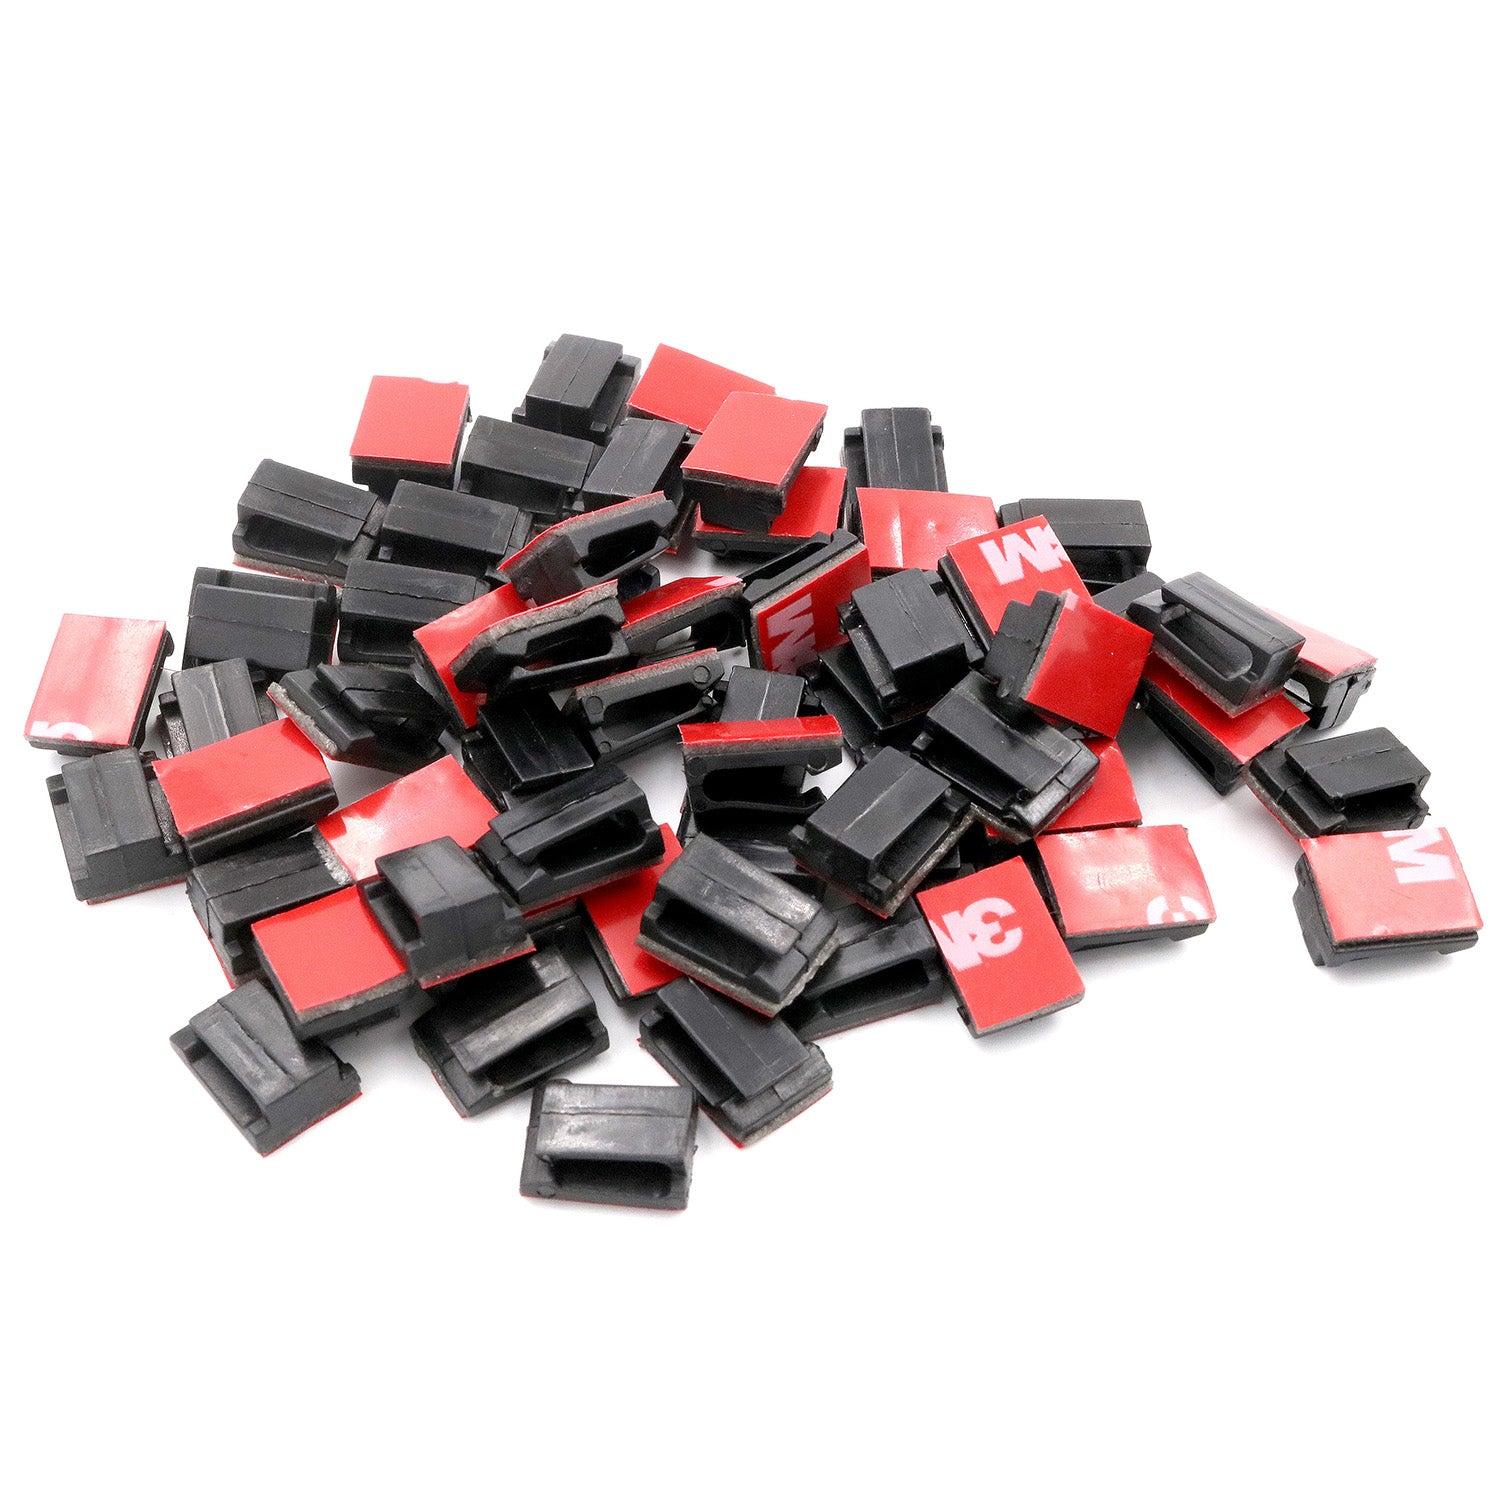 Mini Cable Clips (12mm x 9.5mm) - 100 Pack Bundled with 10 Bonus Reusable Cable Ties